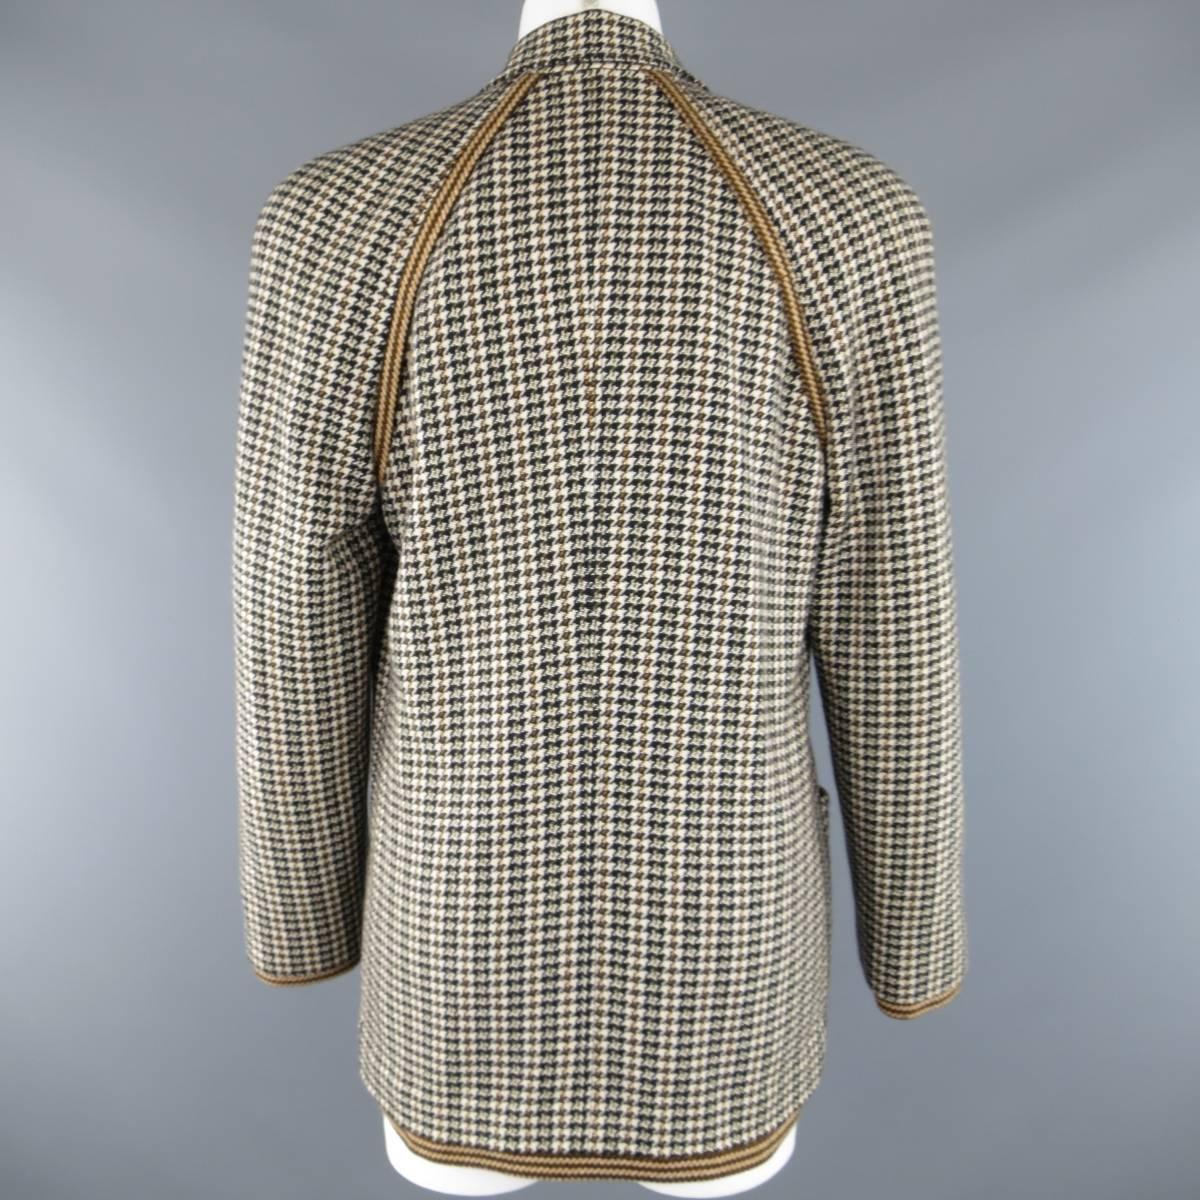 GIANNI VERSACE 1980s Size 8 Beige Houndstooth Cashmere Double Breasted Jacket 2